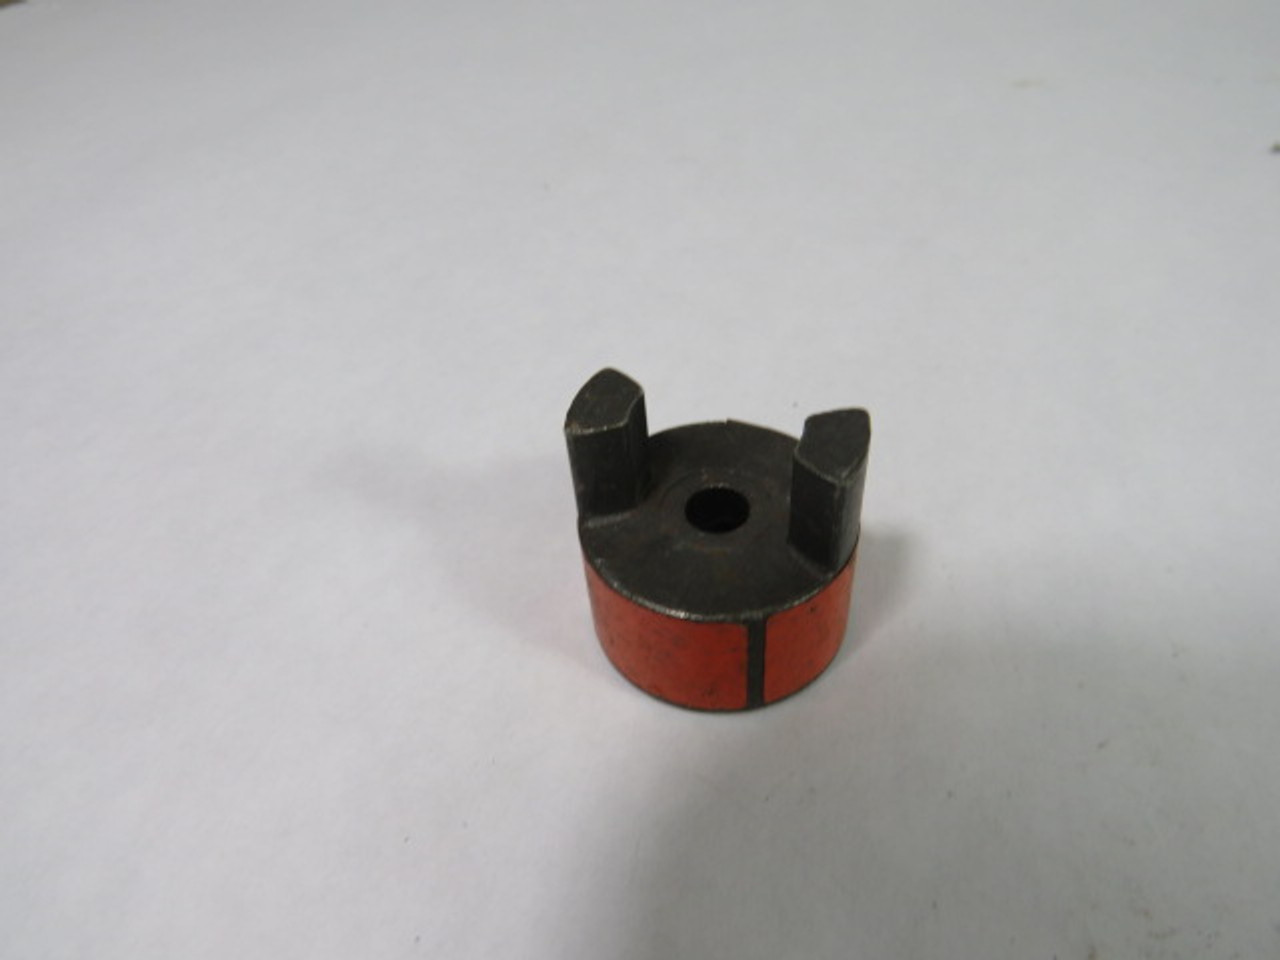 Lovejoy L-050-.250 Jaw Coupling 1/4" Bore USED